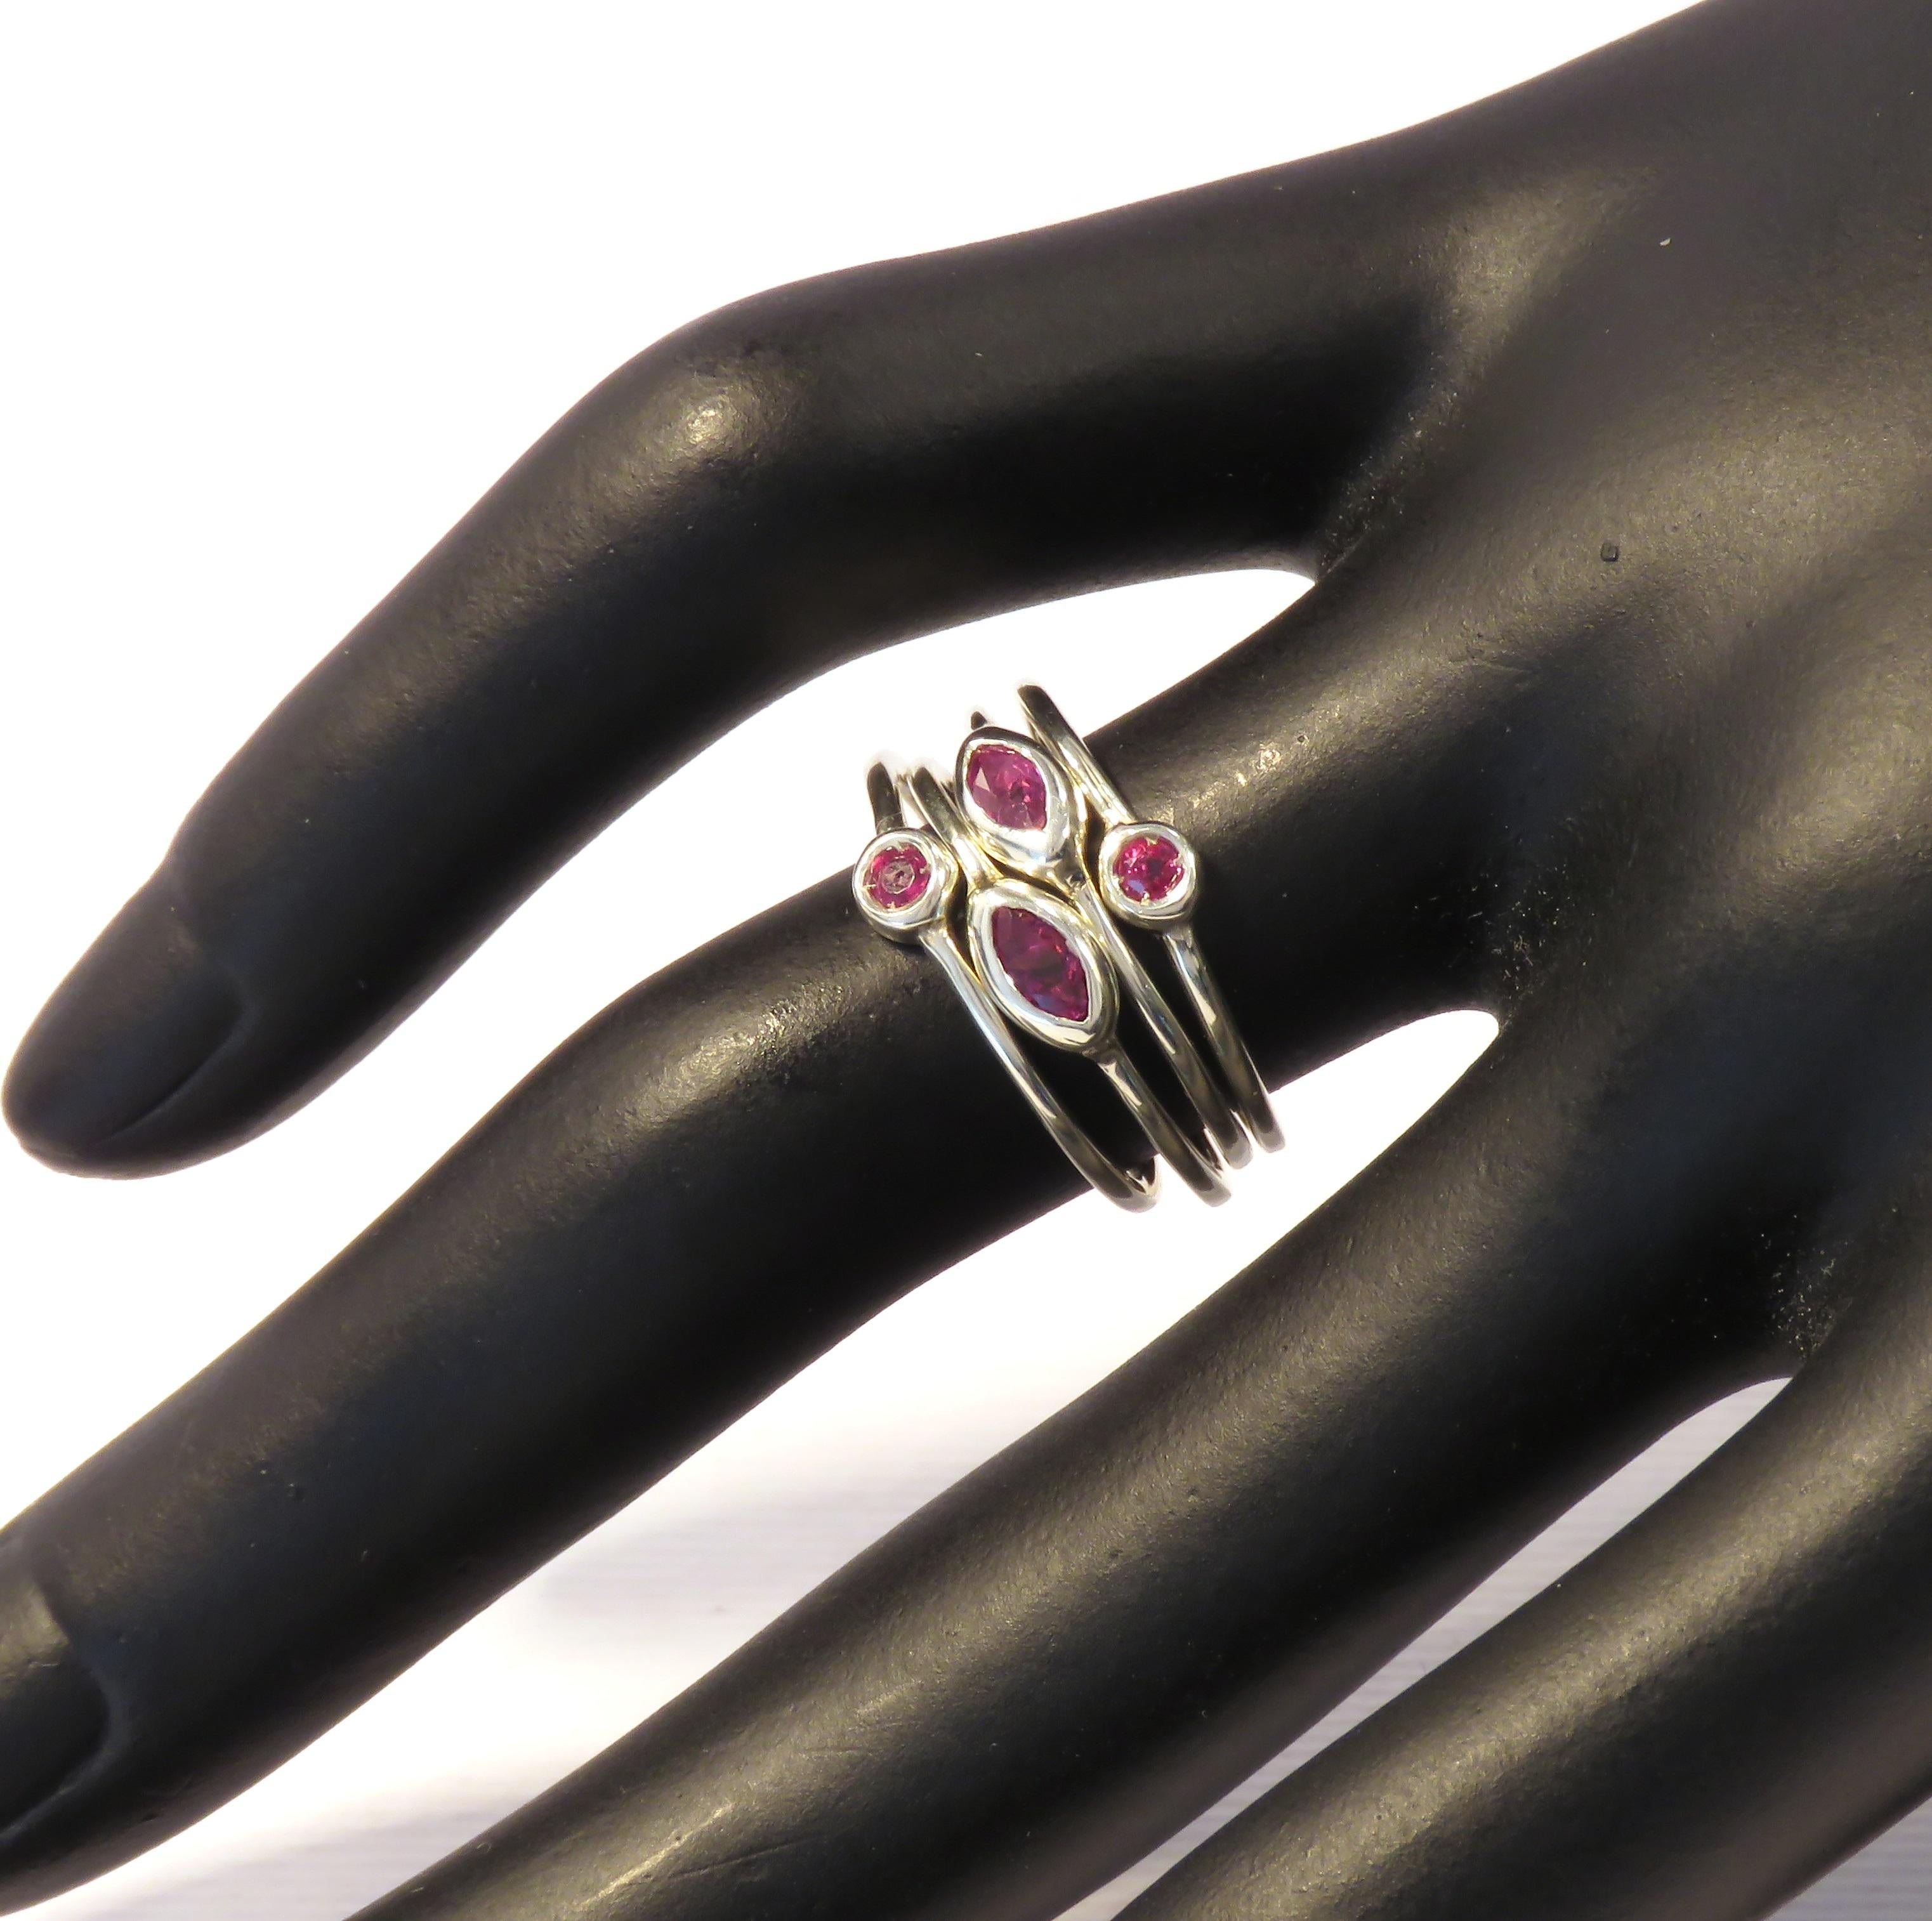 Modern stacking rings in 9 karat white gold with natural navette cut and brilliant cut rubies. The price of this item is for four stacking rings and it is composed by four rings with 2 rubies brilliant cut and 2 rubies navette cut. US finger size is